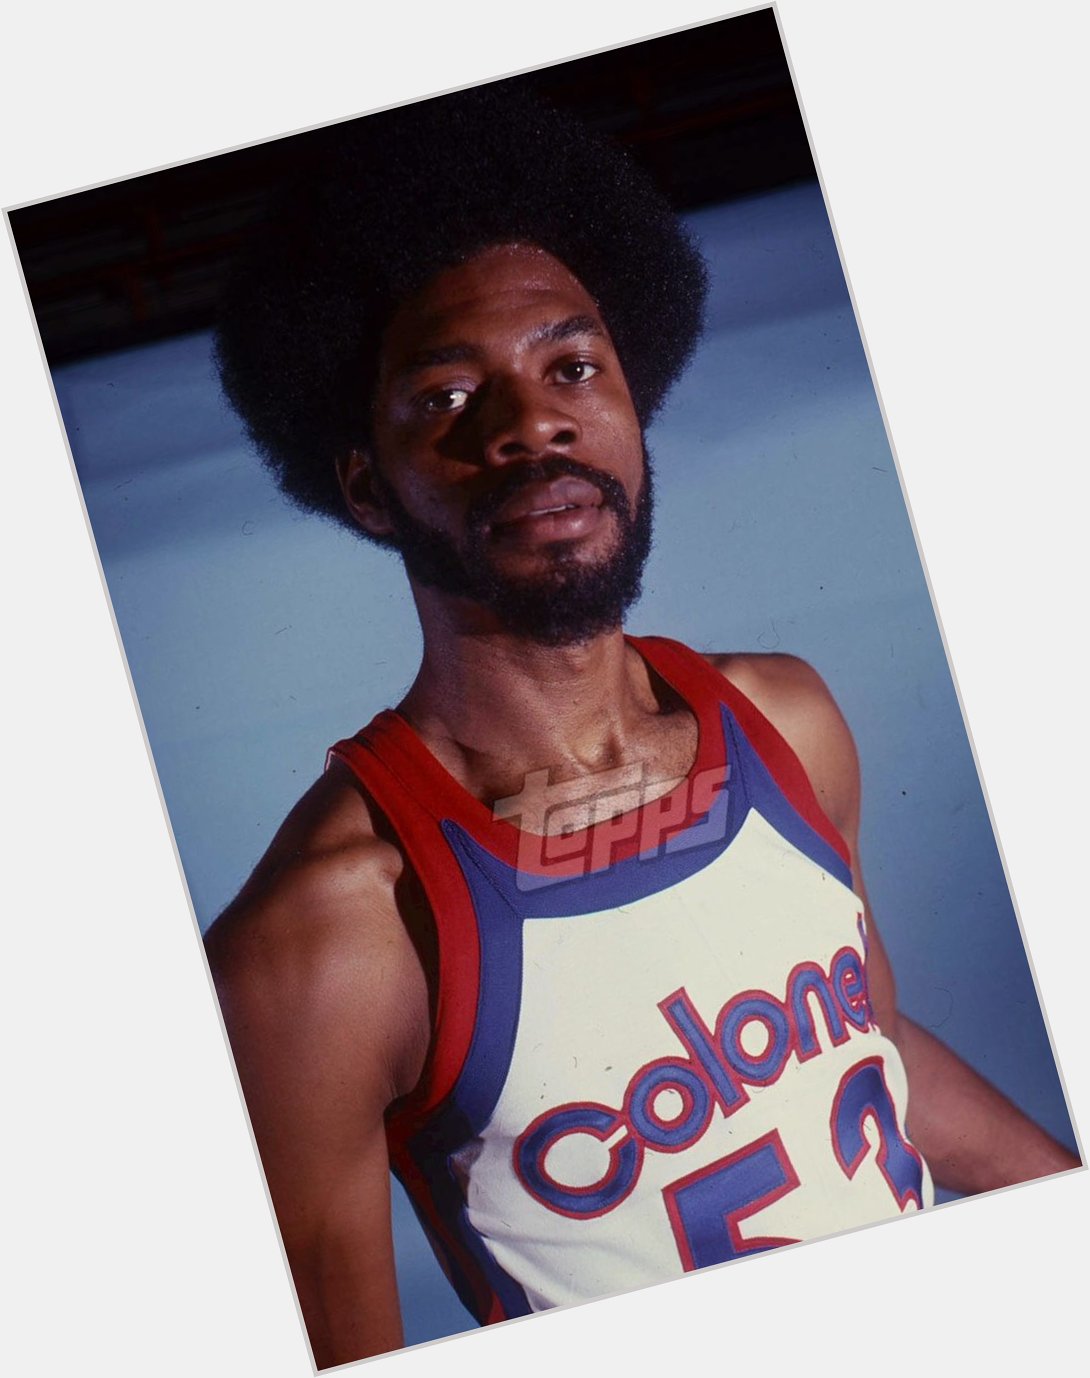 A very happy 72nd birthday to our and 1975 ABA Champion, Artis Gilmore ! 